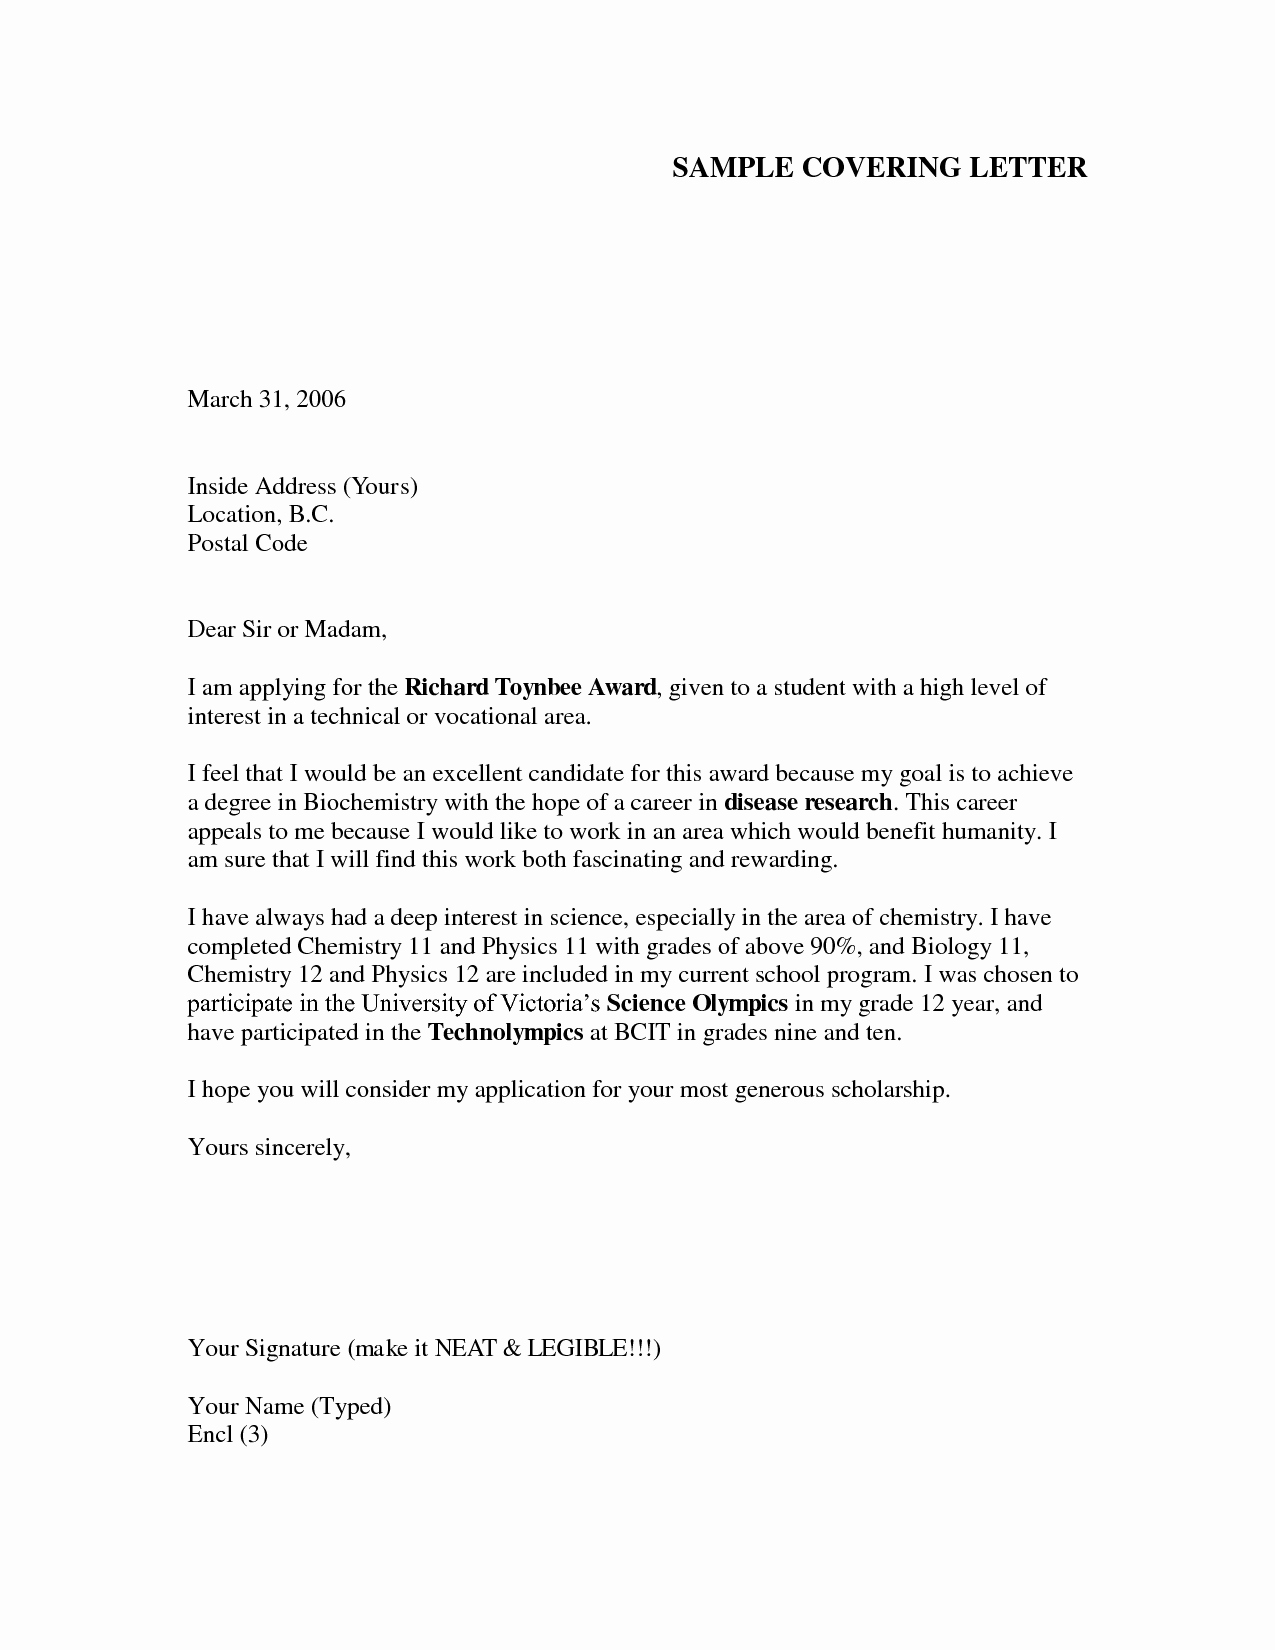 Sample Job Applications Unique Cover Letter format Creating An Executive Cover Letter